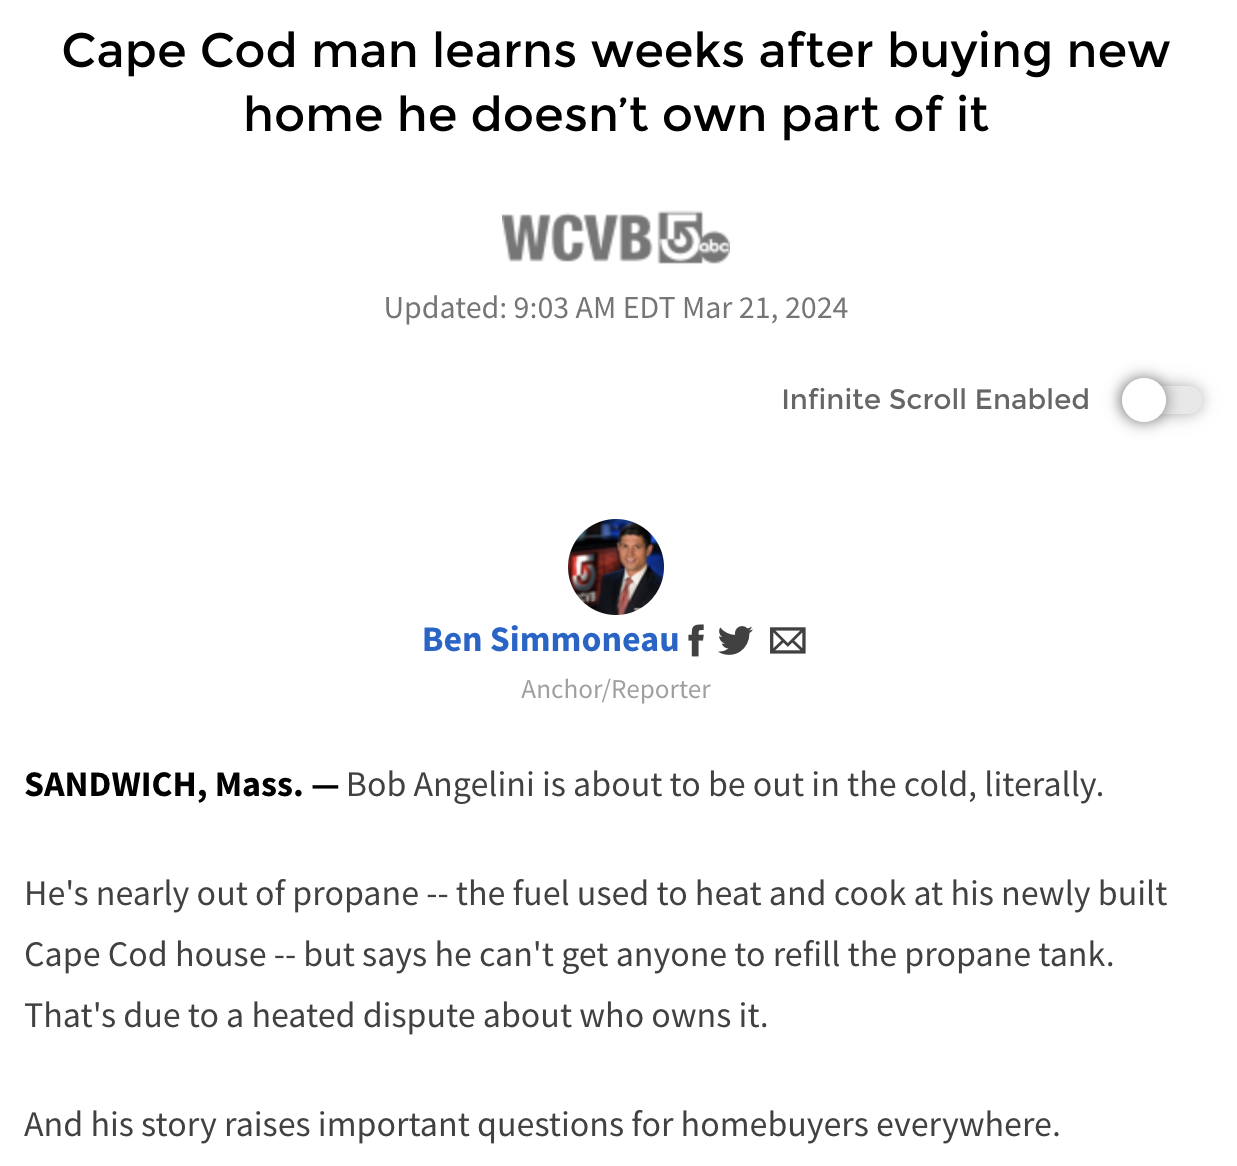 angle - Cape Cod man learns weeks after buying new home he doesn't own part of it Wcvb 5.b abc Updated Edt Infinite Scroll Enabled Sandwich, Mass. Ben Simmoneau fy AnchorReporter Bob Angelini is about to be out in the cold, literally. He's nearly out of p